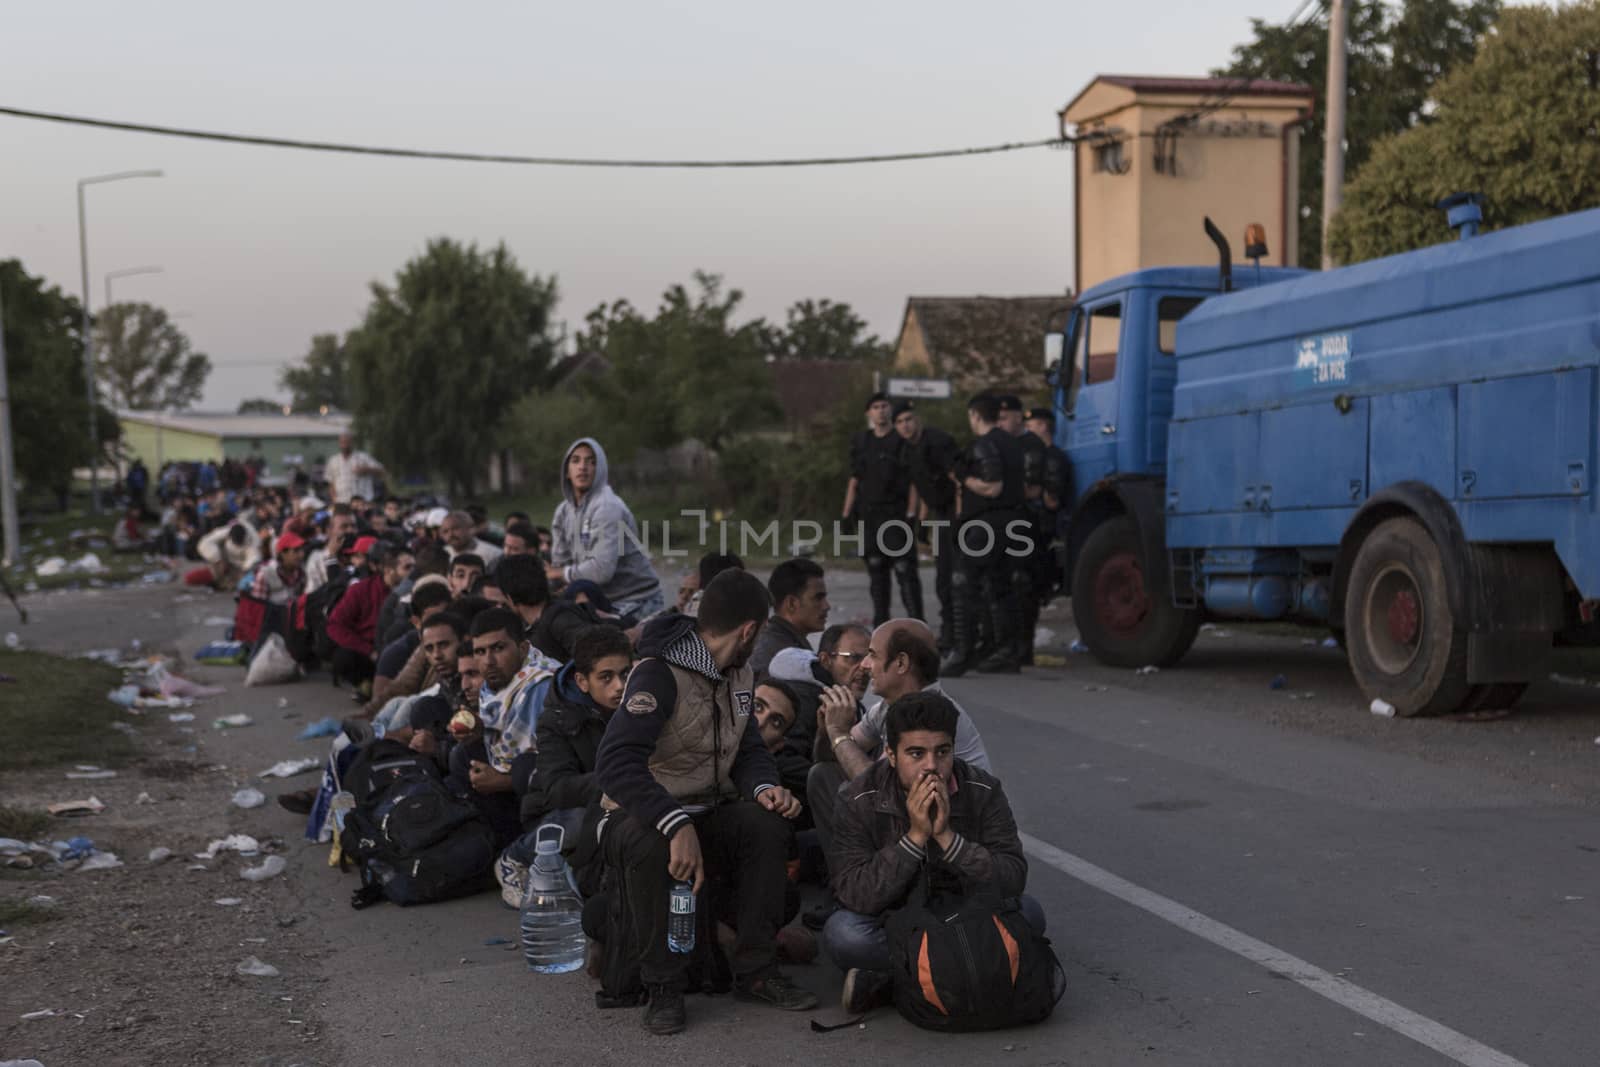 CROATIA, Tovarnik: Refugees wait in line in Tovarnik, Croatia near the Serbian-border while police watch on in the background on September 18, 2015. Refugees are hoping to continue their journey to Germany and Northern Europe via Slovenia 